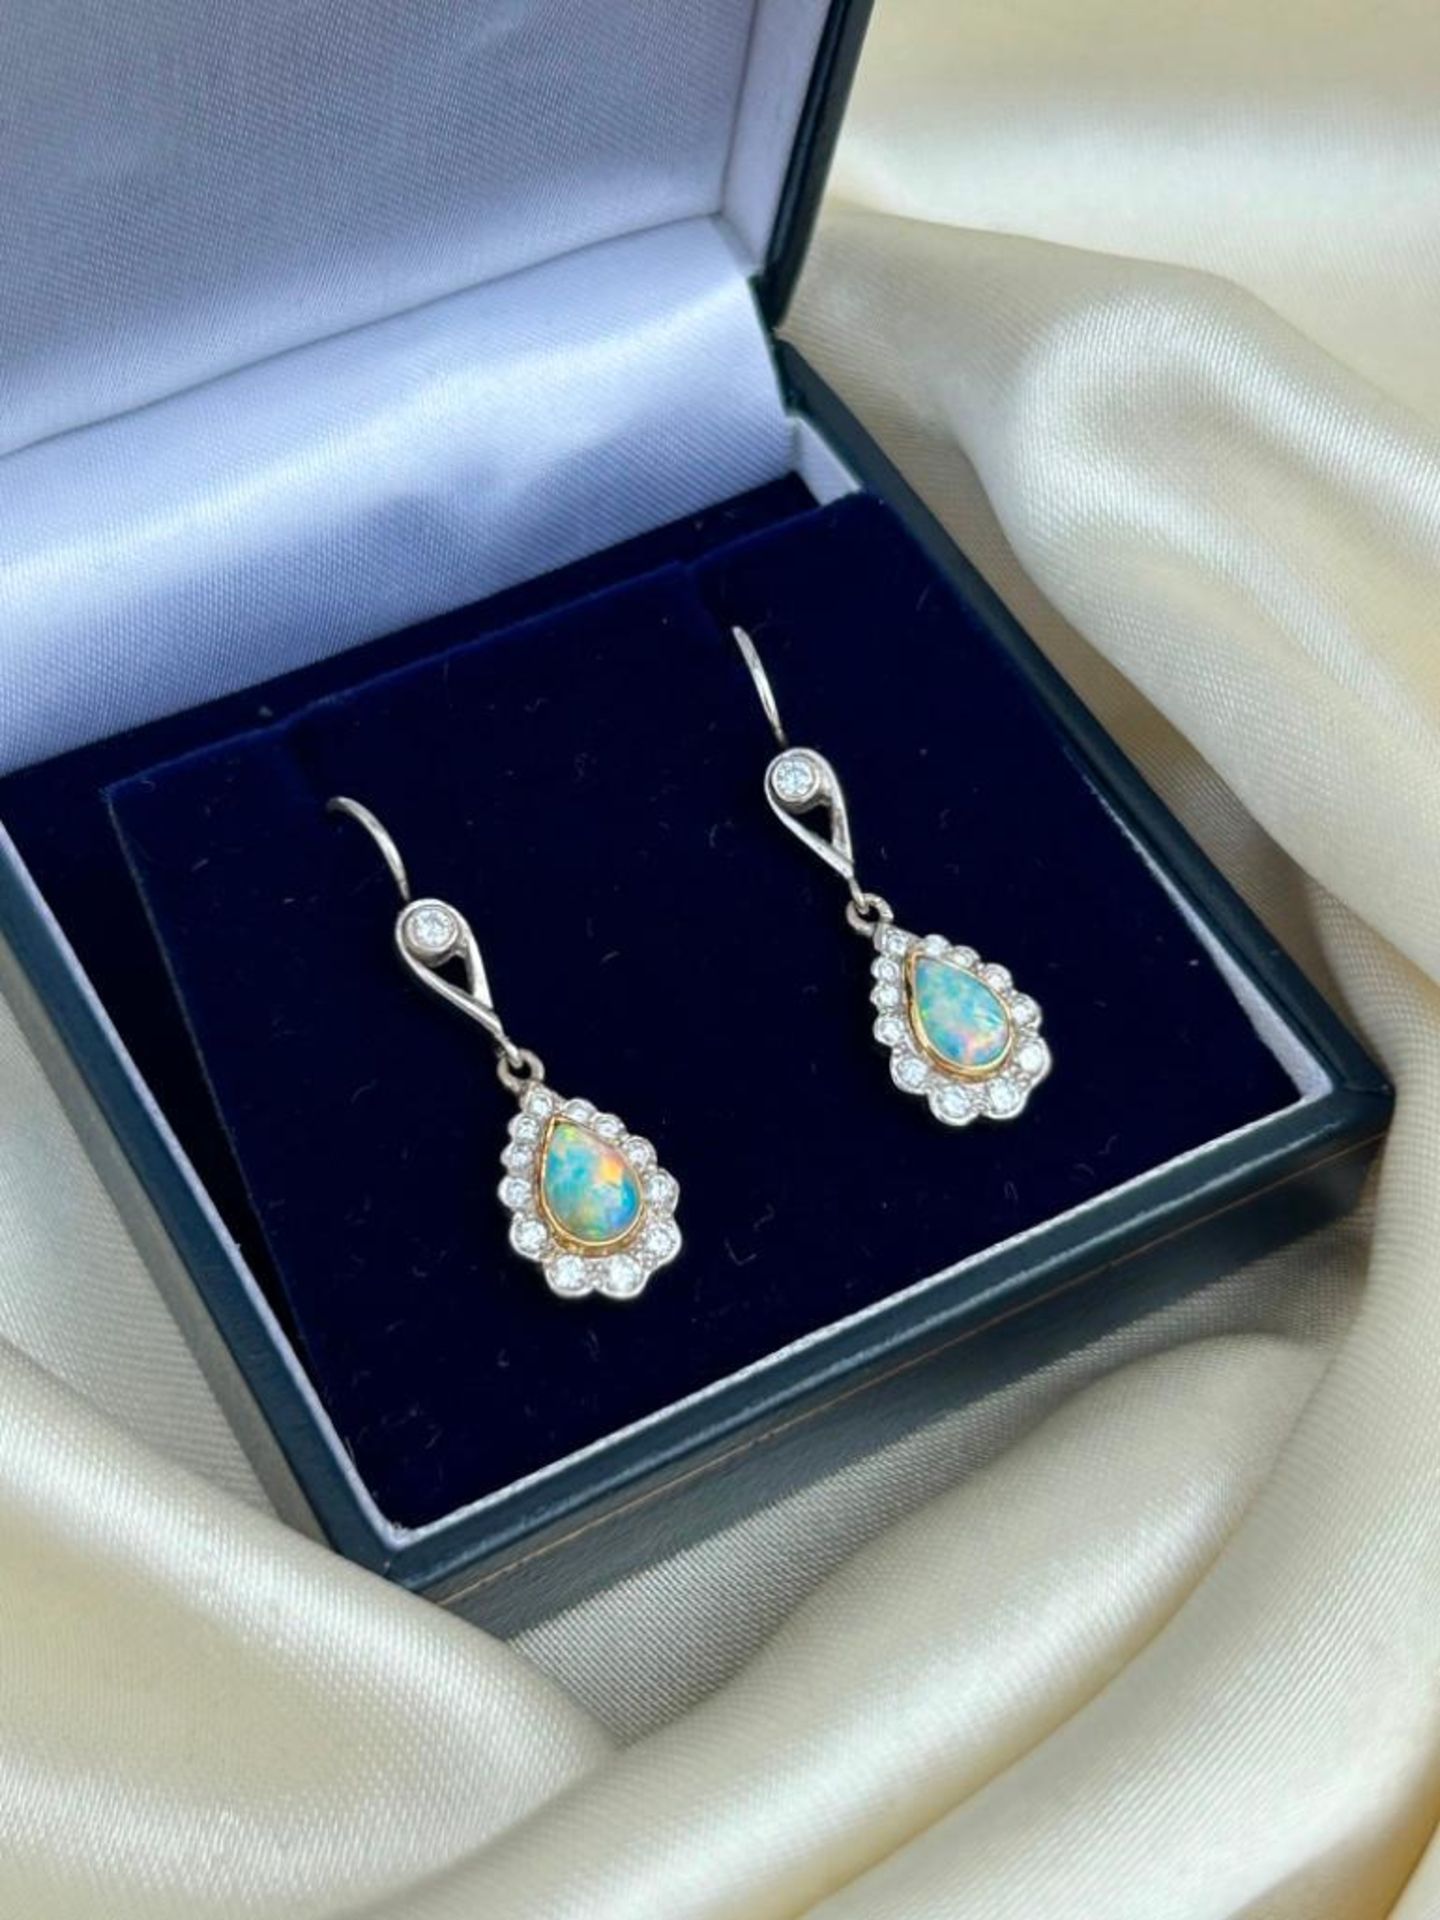 Amazing Opal and Diamond Drop Earrings in White Gold - Image 8 of 9